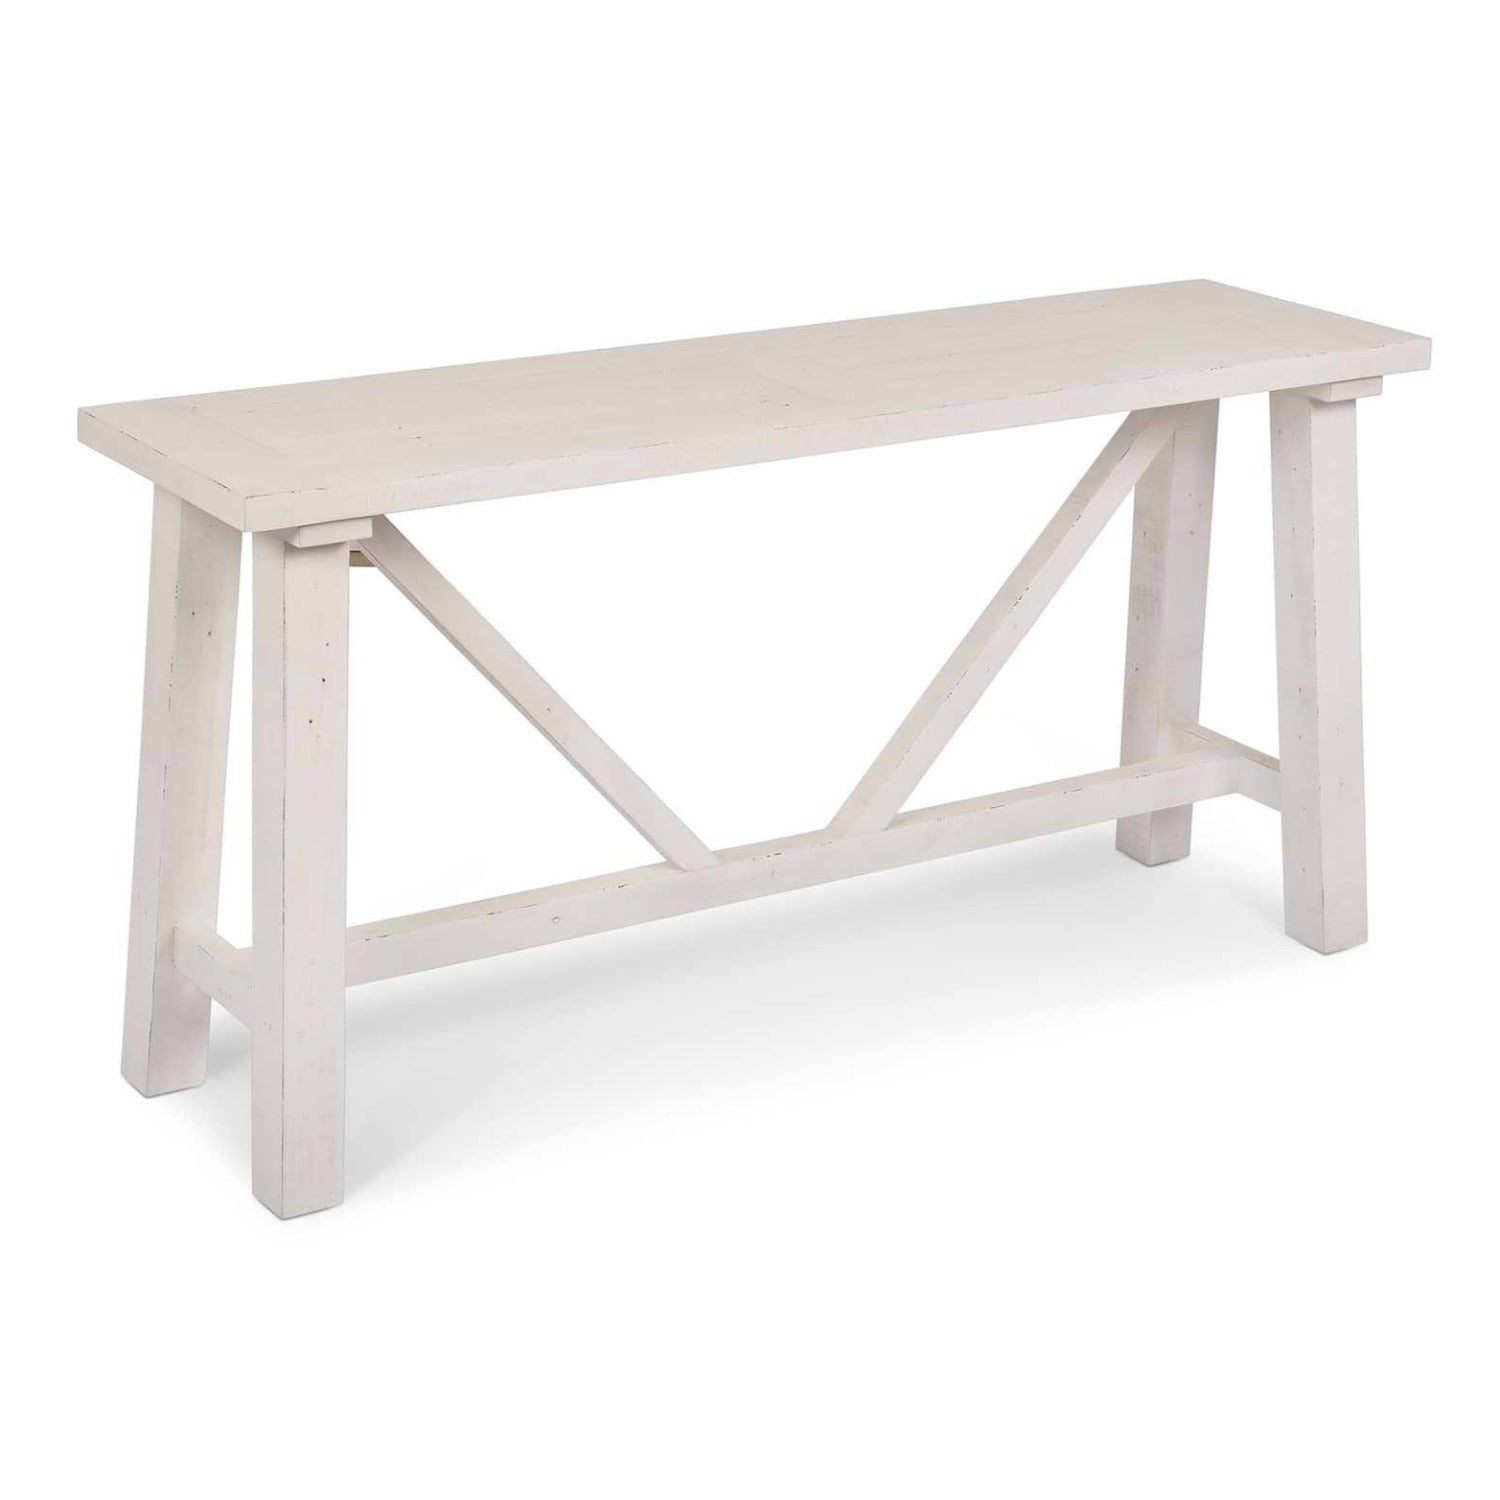 Ashwell Wooden Console Table